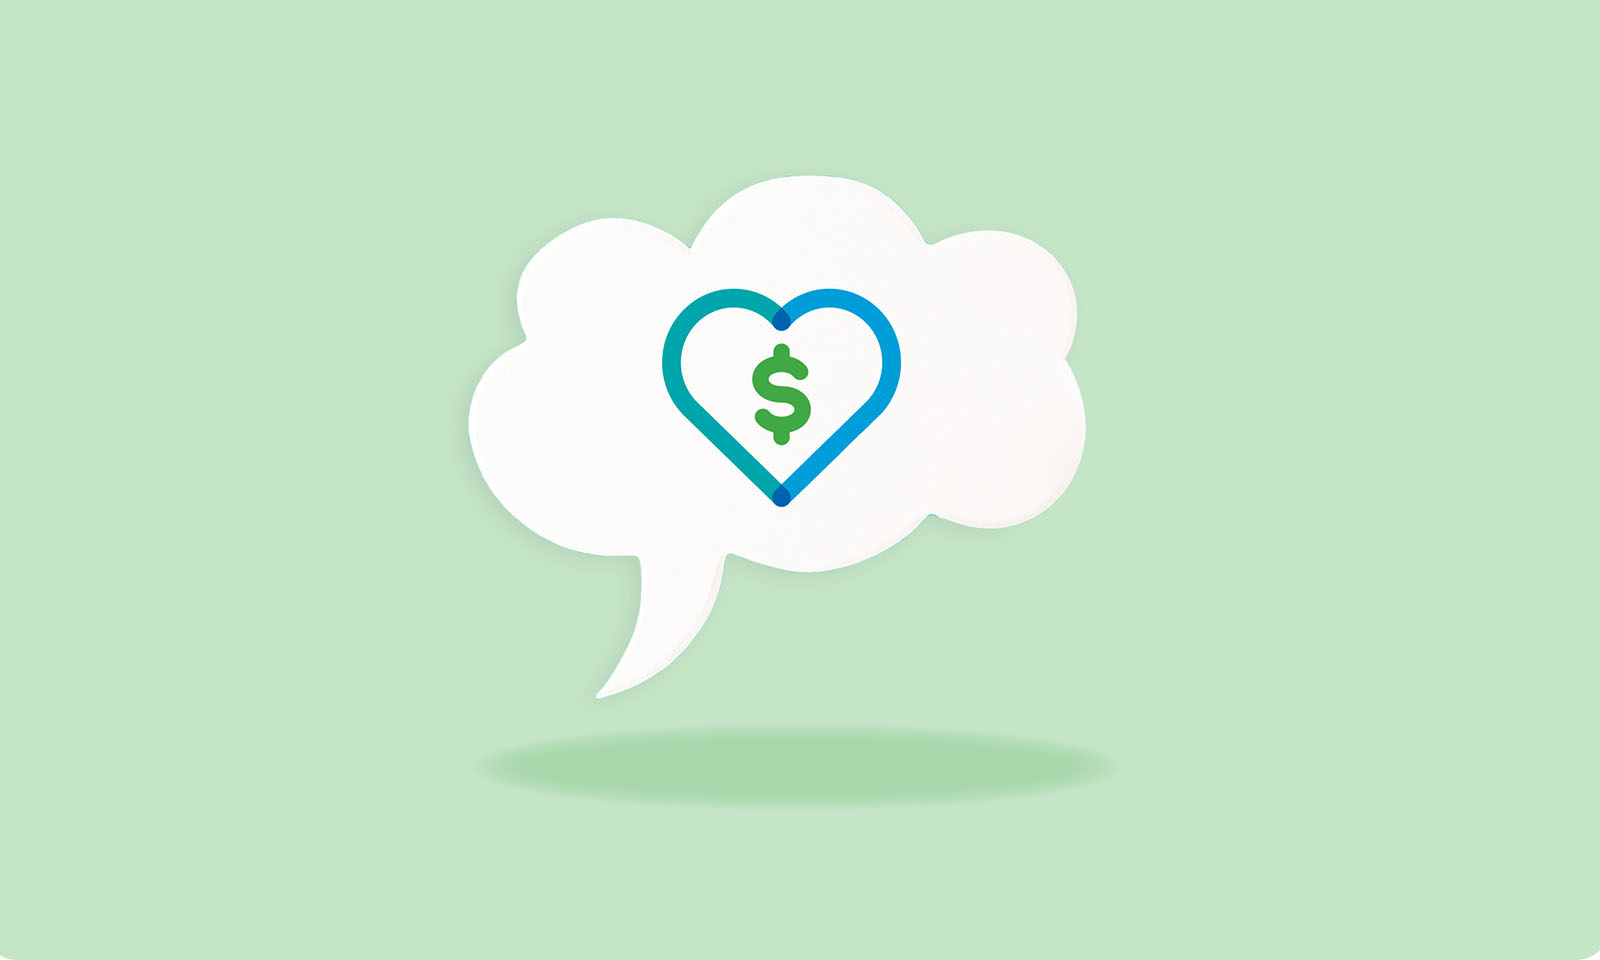 A dollar symbol within a heart that's within a cloud-shaped speech bubble